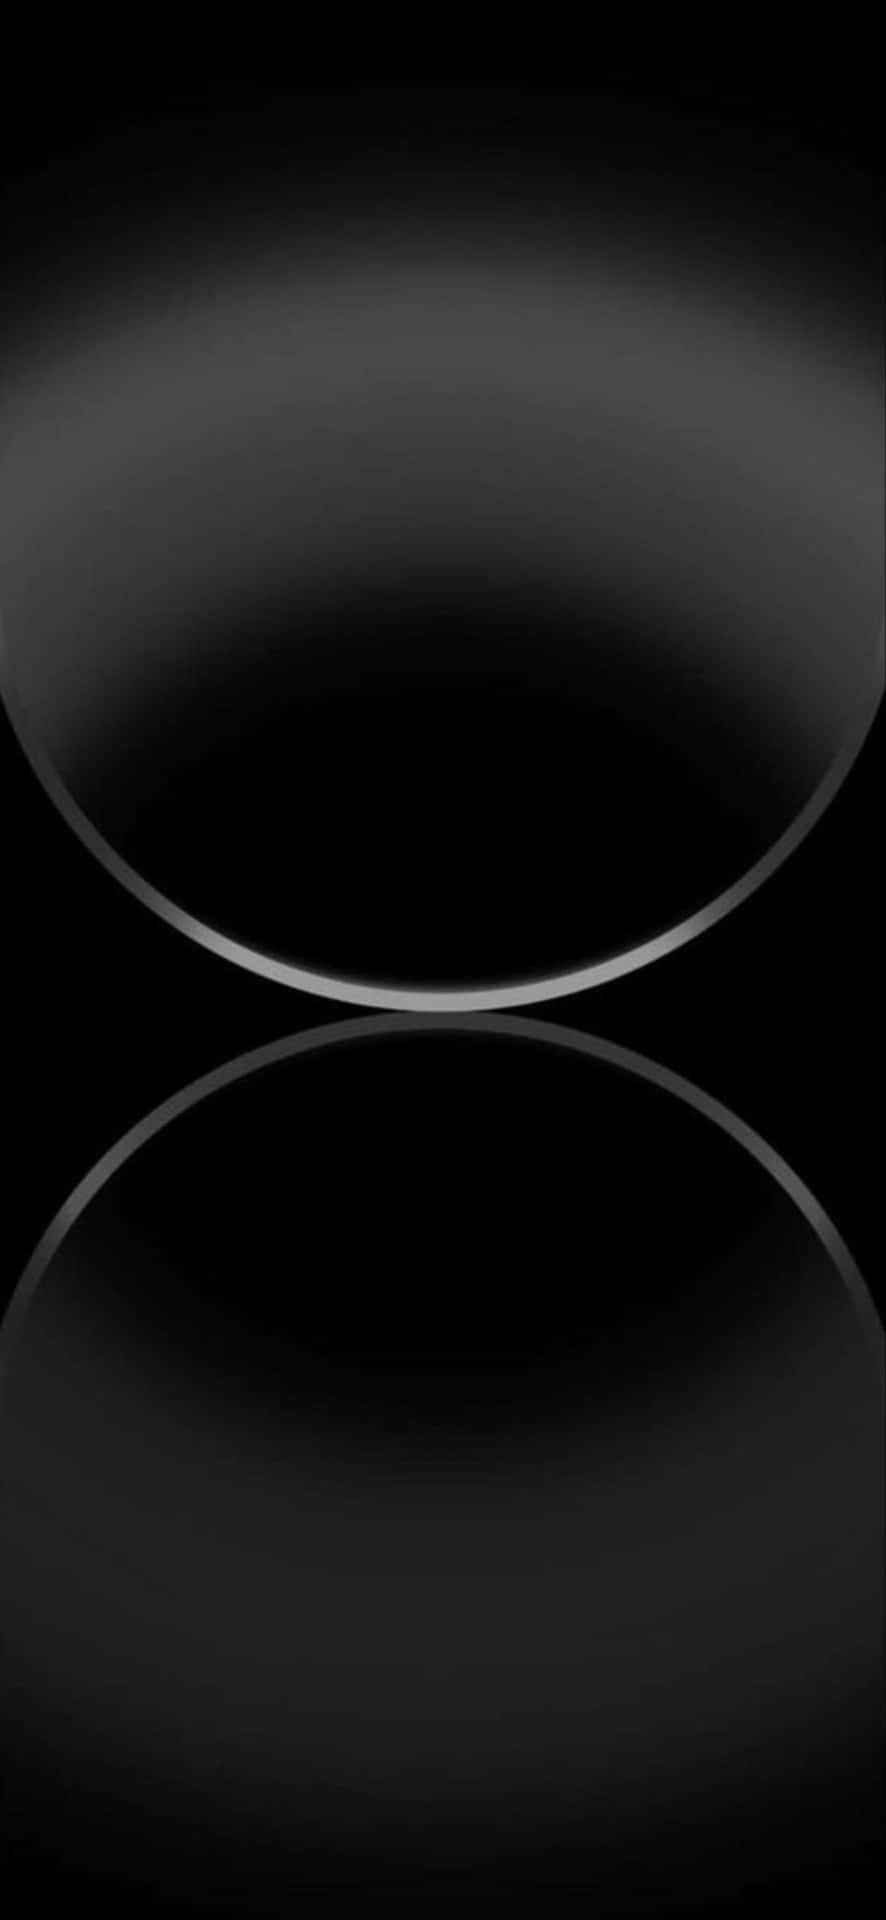 Abstract Black Sphere Reflection Wallpaper